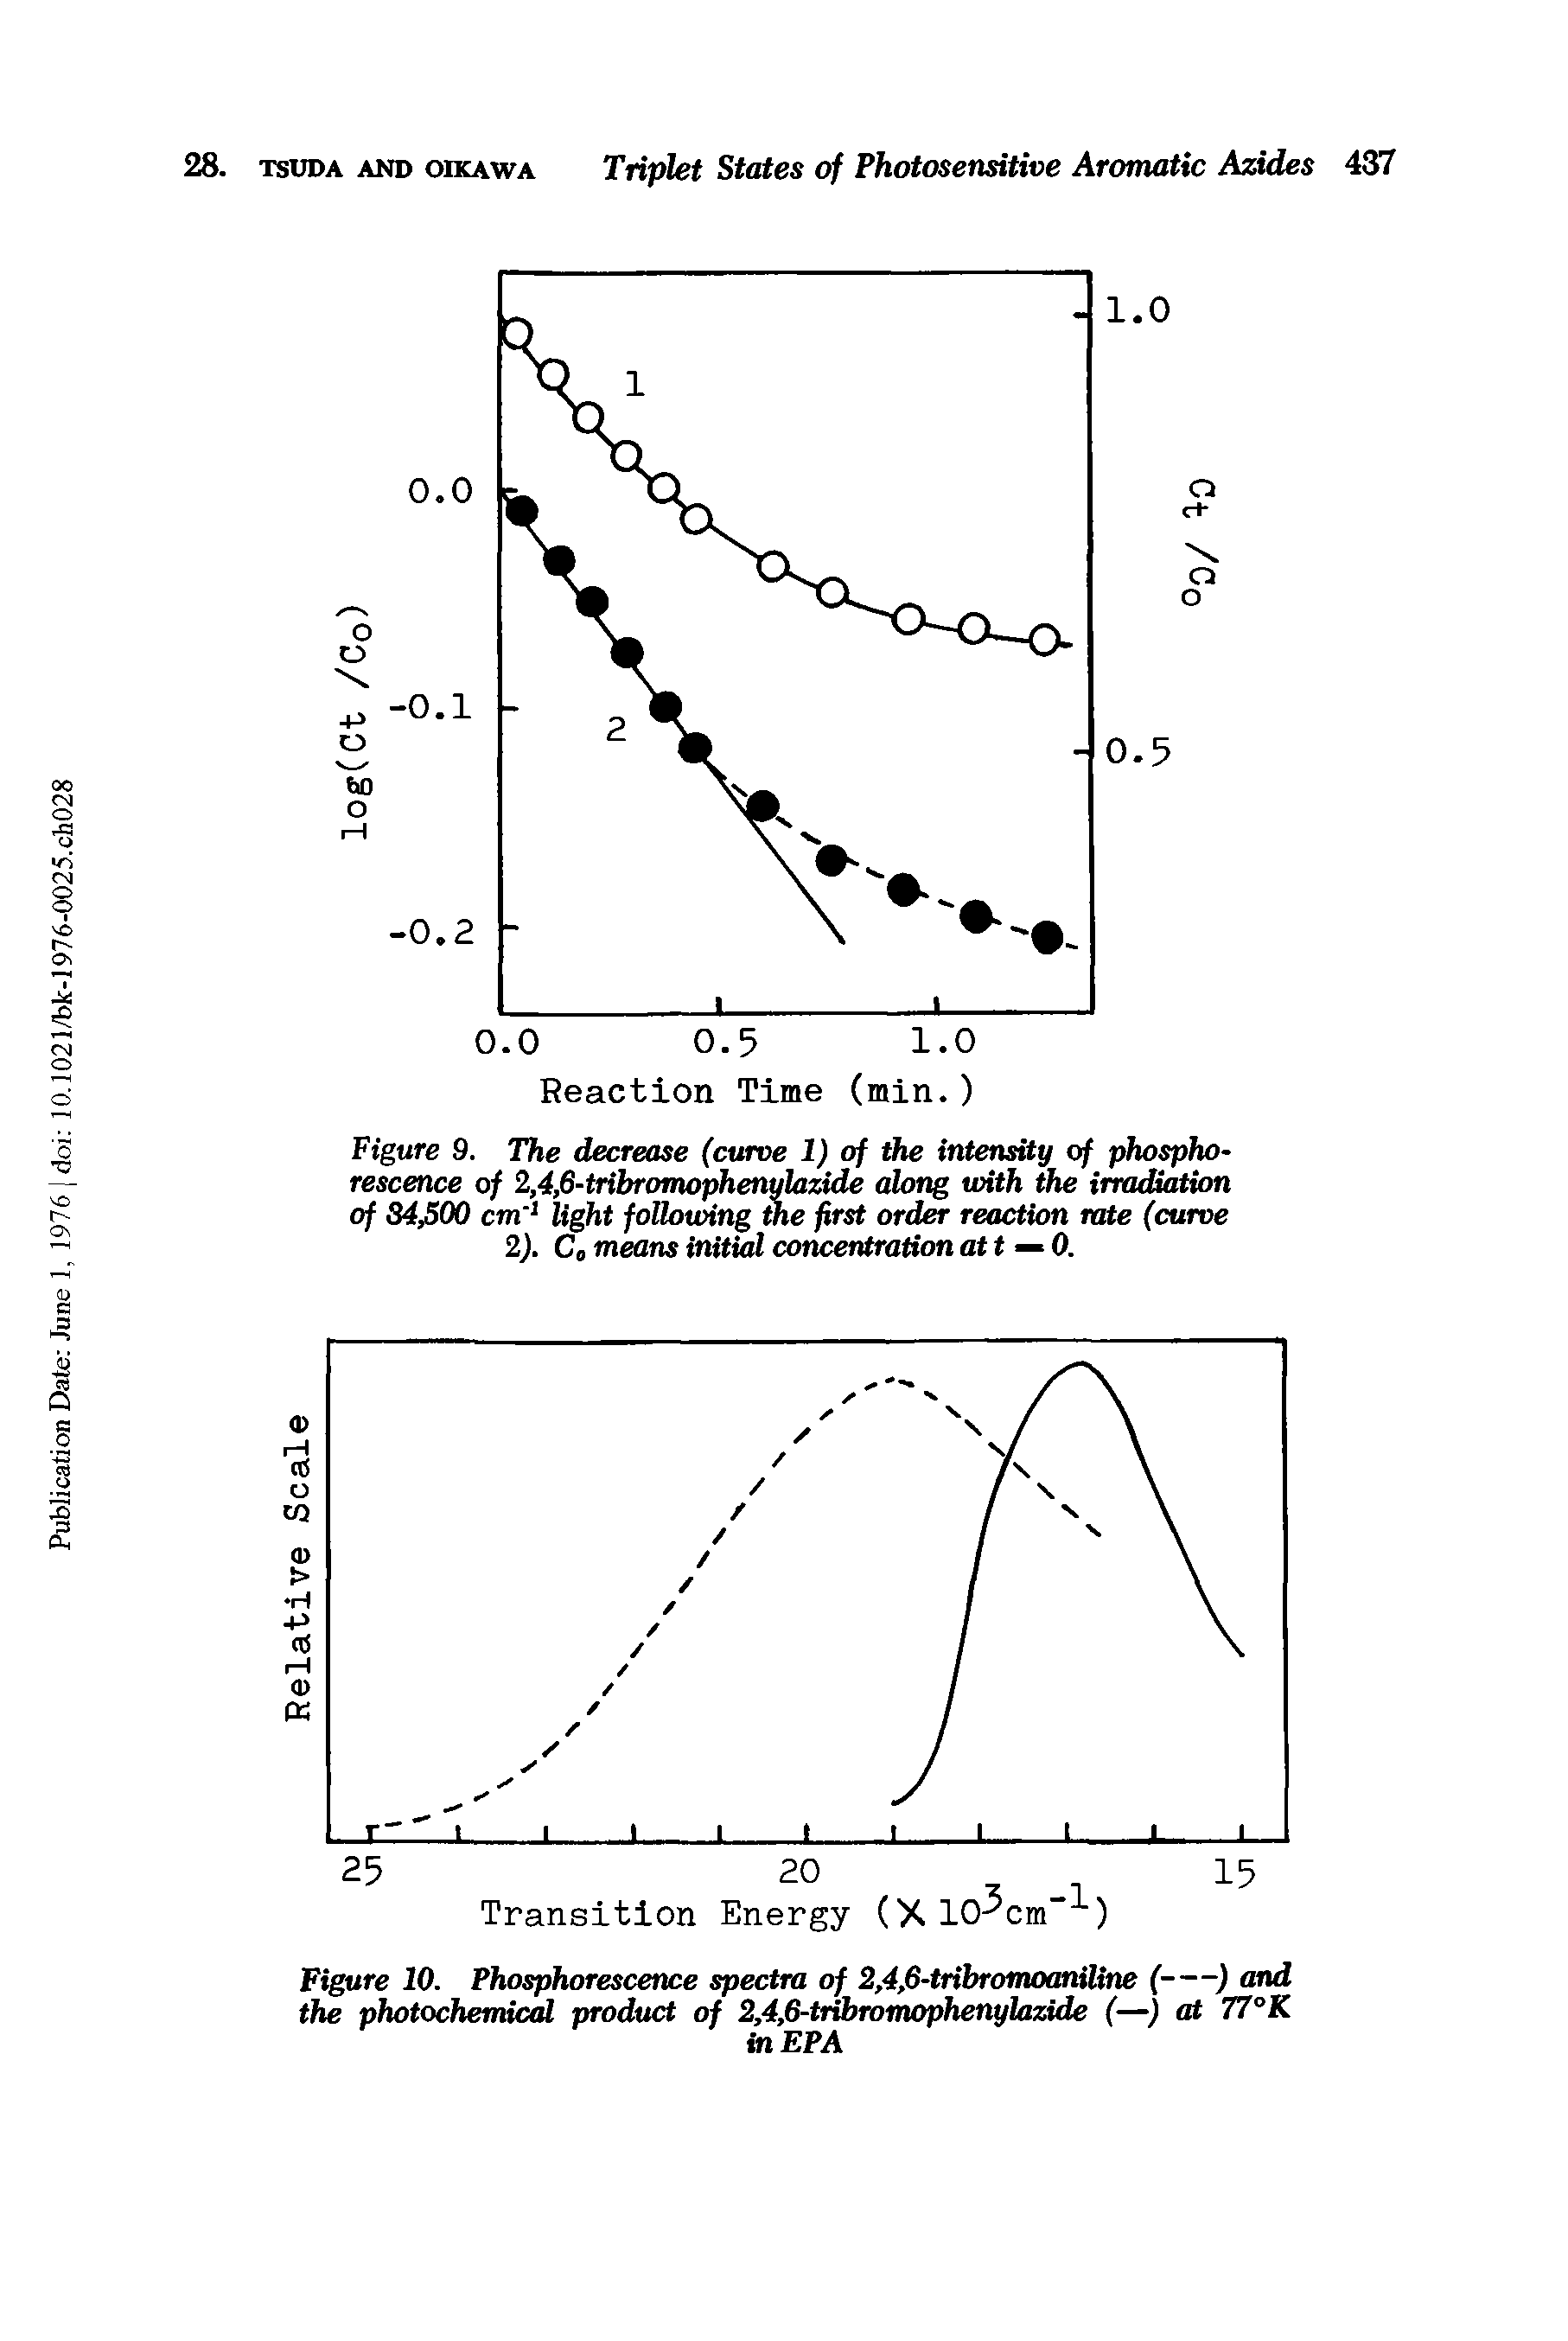 Figure 9. The decrease (curve 1) of the intensity of phosphorescence of 2,4,6-tribromophenylazide along with the irradiation of 84 00 cm light following me first order reaction rate (curve 2). Co means initial conceniration att—0.